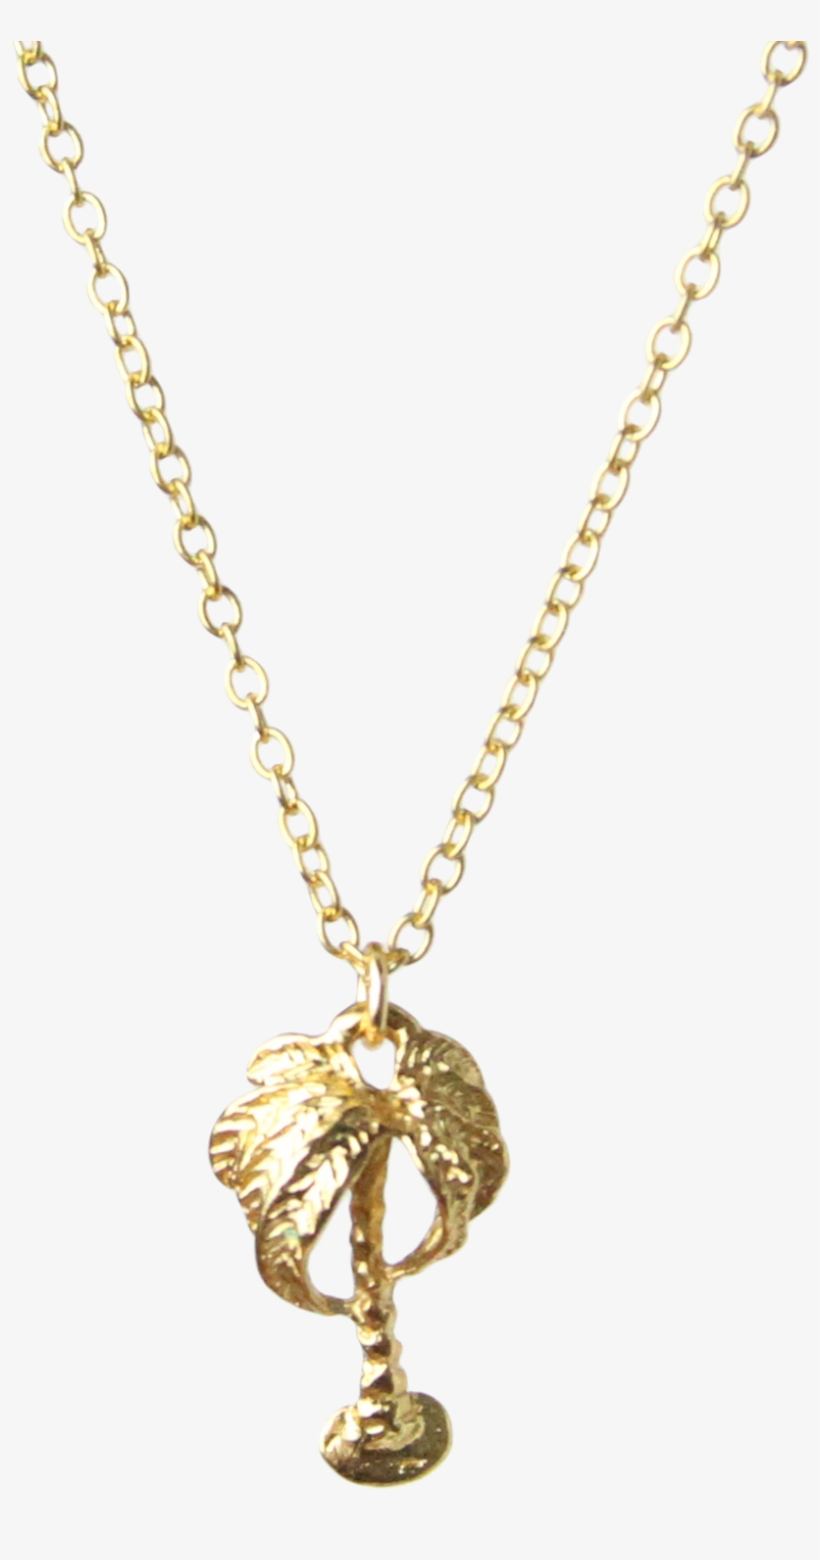 Mini Palm Tree Charm Necklace In Gold Vermeil - Collier Merci Maman Pierre, transparent png #18351